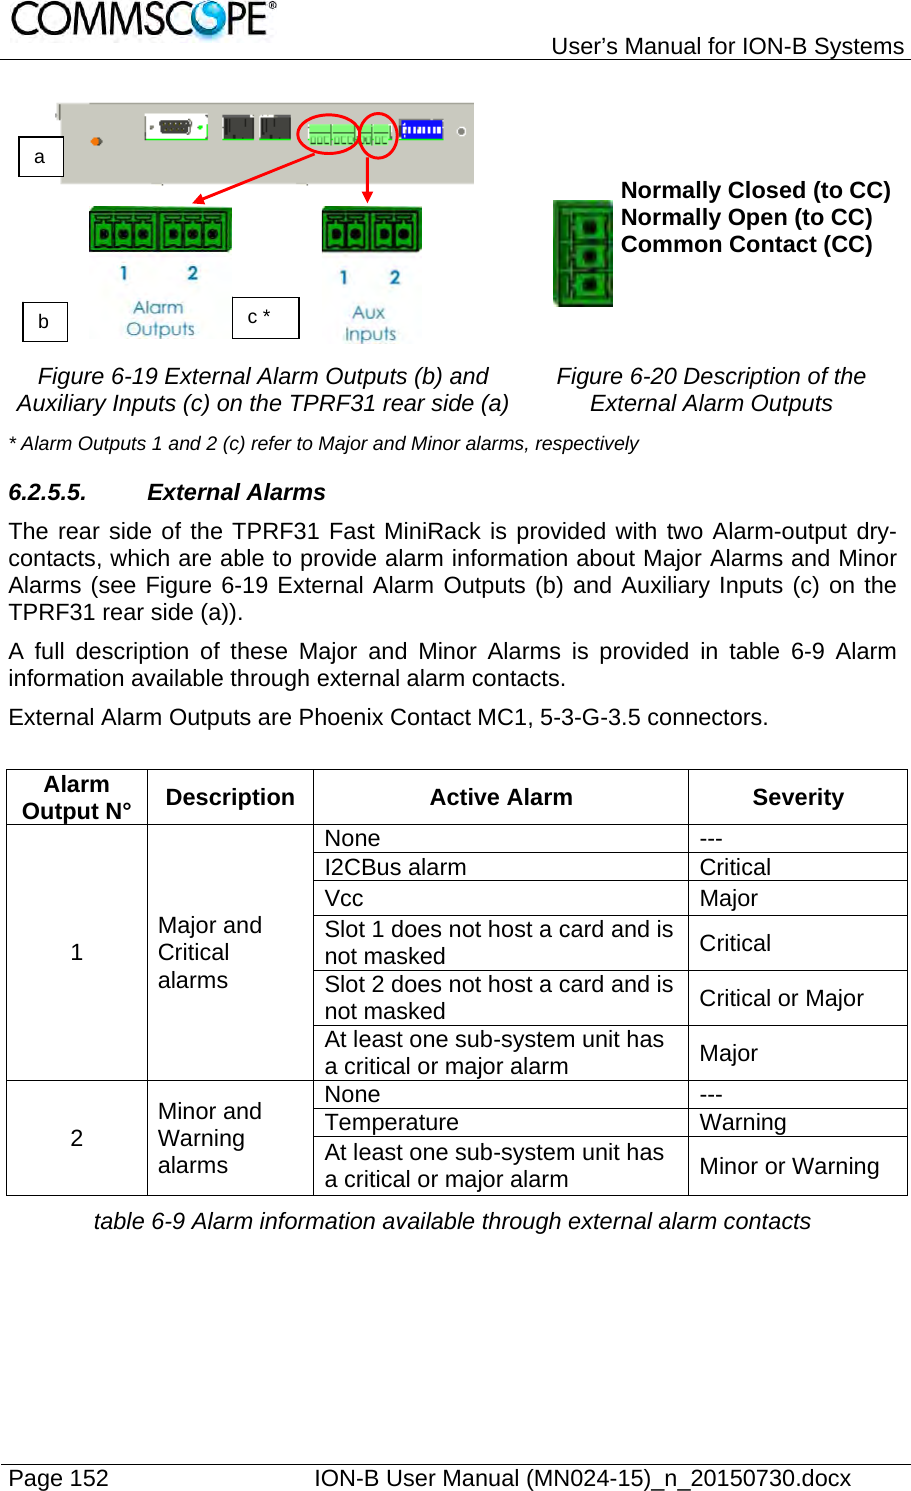   User’s Manual for ION-B Systems Page 152    ION-B User Manual (MN024-15)_n_20150730.docx  b  c * Normally Closed (to CC)Normally Open (to CC) Common Contact (CC)  Figure 6-19 External Alarm Outputs (b) and Auxiliary Inputs (c) on the TPRF31 rear side (a) Figure 6-20 Description of the External Alarm Outputs * Alarm Outputs 1 and 2 (c) refer to Major and Minor alarms, respectively 6.2.5.5. External Alarms The rear side of the TPRF31 Fast MiniRack is provided with two Alarm-output dry-contacts, which are able to provide alarm information about Major Alarms and Minor Alarms (see Figure 6-19 External Alarm Outputs (b) and Auxiliary Inputs (c) on the TPRF31 rear side (a)). A full description of these Major and Minor Alarms is provided in table 6-9 Alarm information available through external alarm contacts. External Alarm Outputs are Phoenix Contact MC1, 5-3-G-3.5 connectors.  Alarm Output N°  Description Active Alarm  Severity 1  Major and Critical alarms None --- I2CBus alarm  Critical Vcc Major Slot 1 does not host a card and is not masked  Critical Slot 2 does not host a card and is not masked  Critical or Major At least one sub-system unit has a critical or major alarm  Major 2  Minor and Warning alarms None --- Temperature Warning At least one sub-system unit has a critical or major alarm  Minor or Warning table 6-9 Alarm information available through external alarm contacts a 